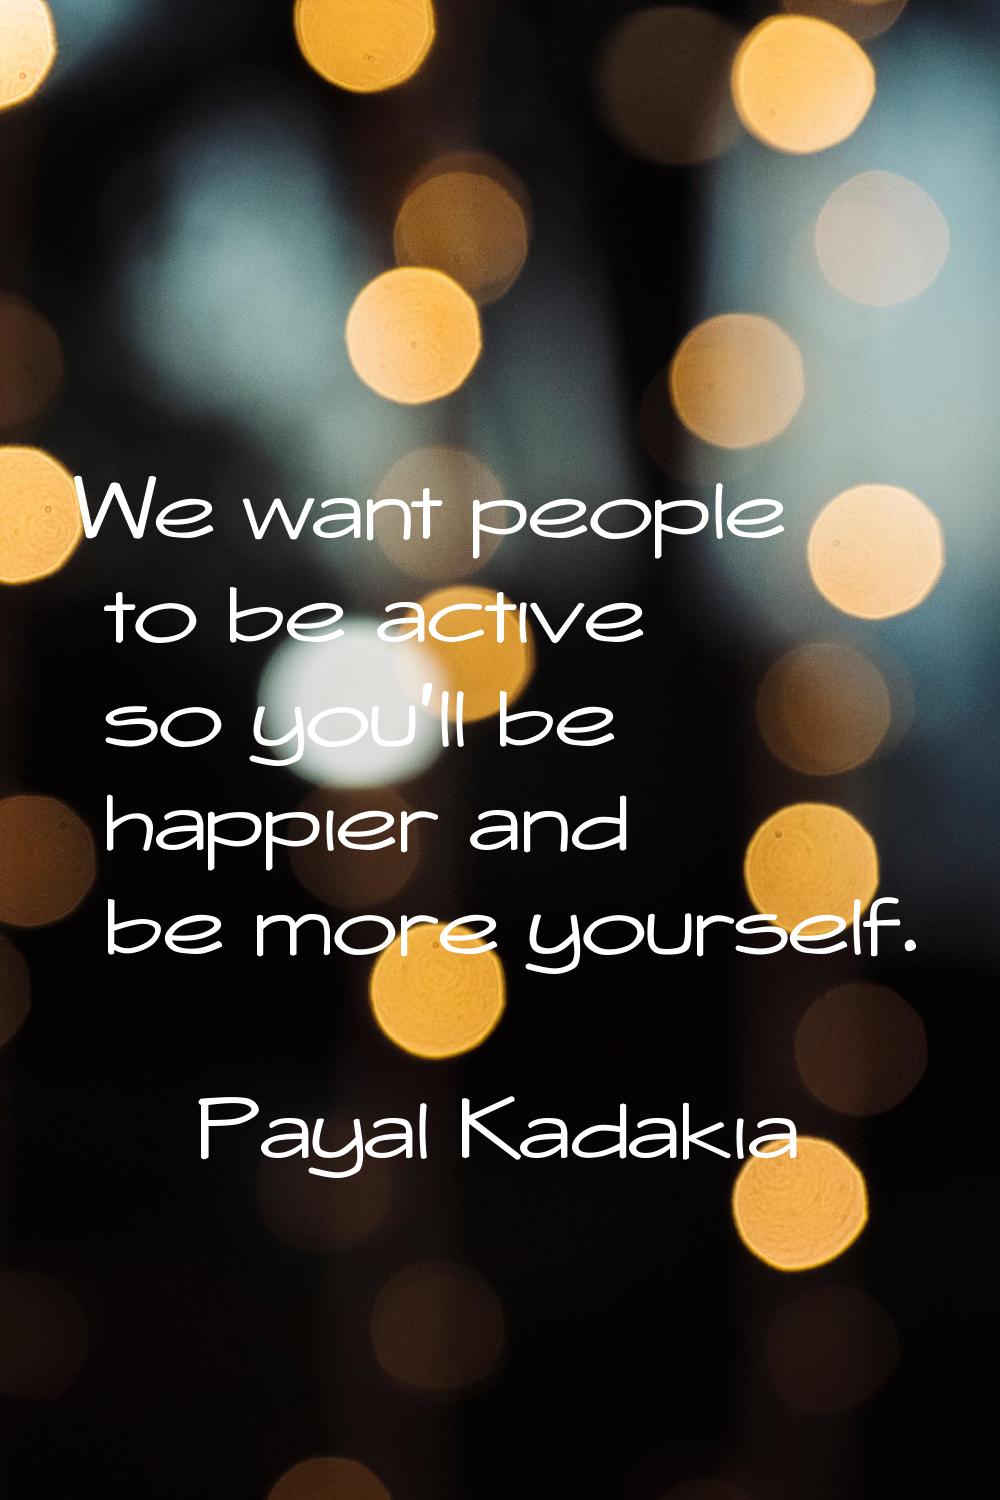 We want people to be active so you'll be happier and be more yourself.